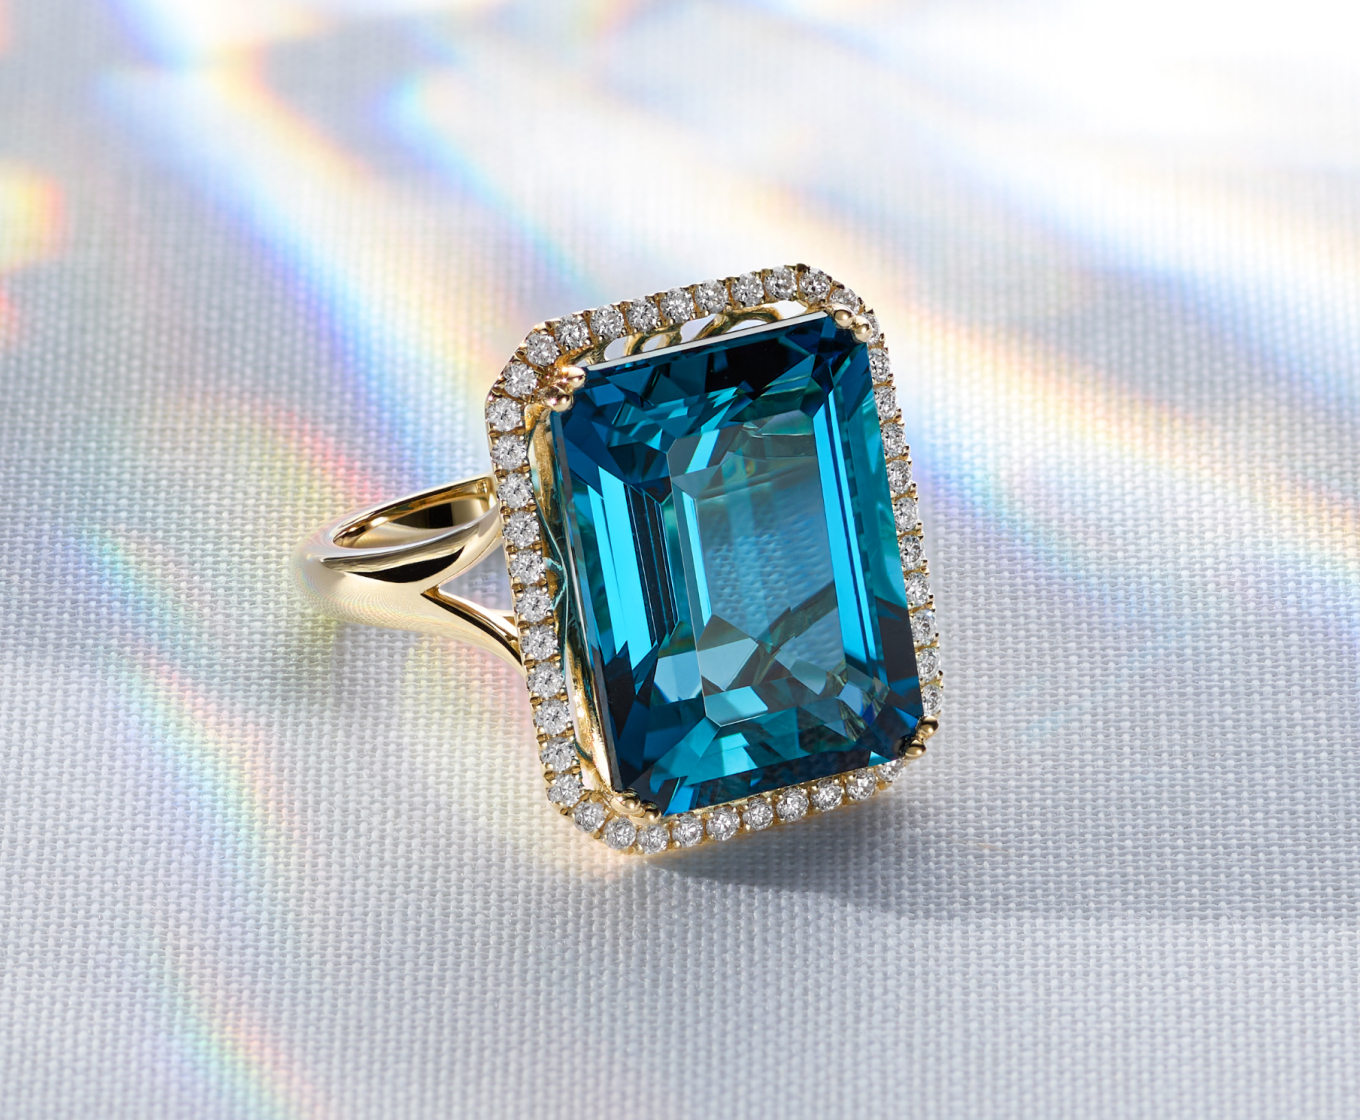 Nascha London Blue Topaz & Diamond Halo Ring A natural diamond halo beautifully frames the natural London blue topaz gemstone at the center of this vibrant cocktail ring. Crafted in warm 14-karat yellow gold, it features filigree detailing around the sides for an ornate finishing touch.